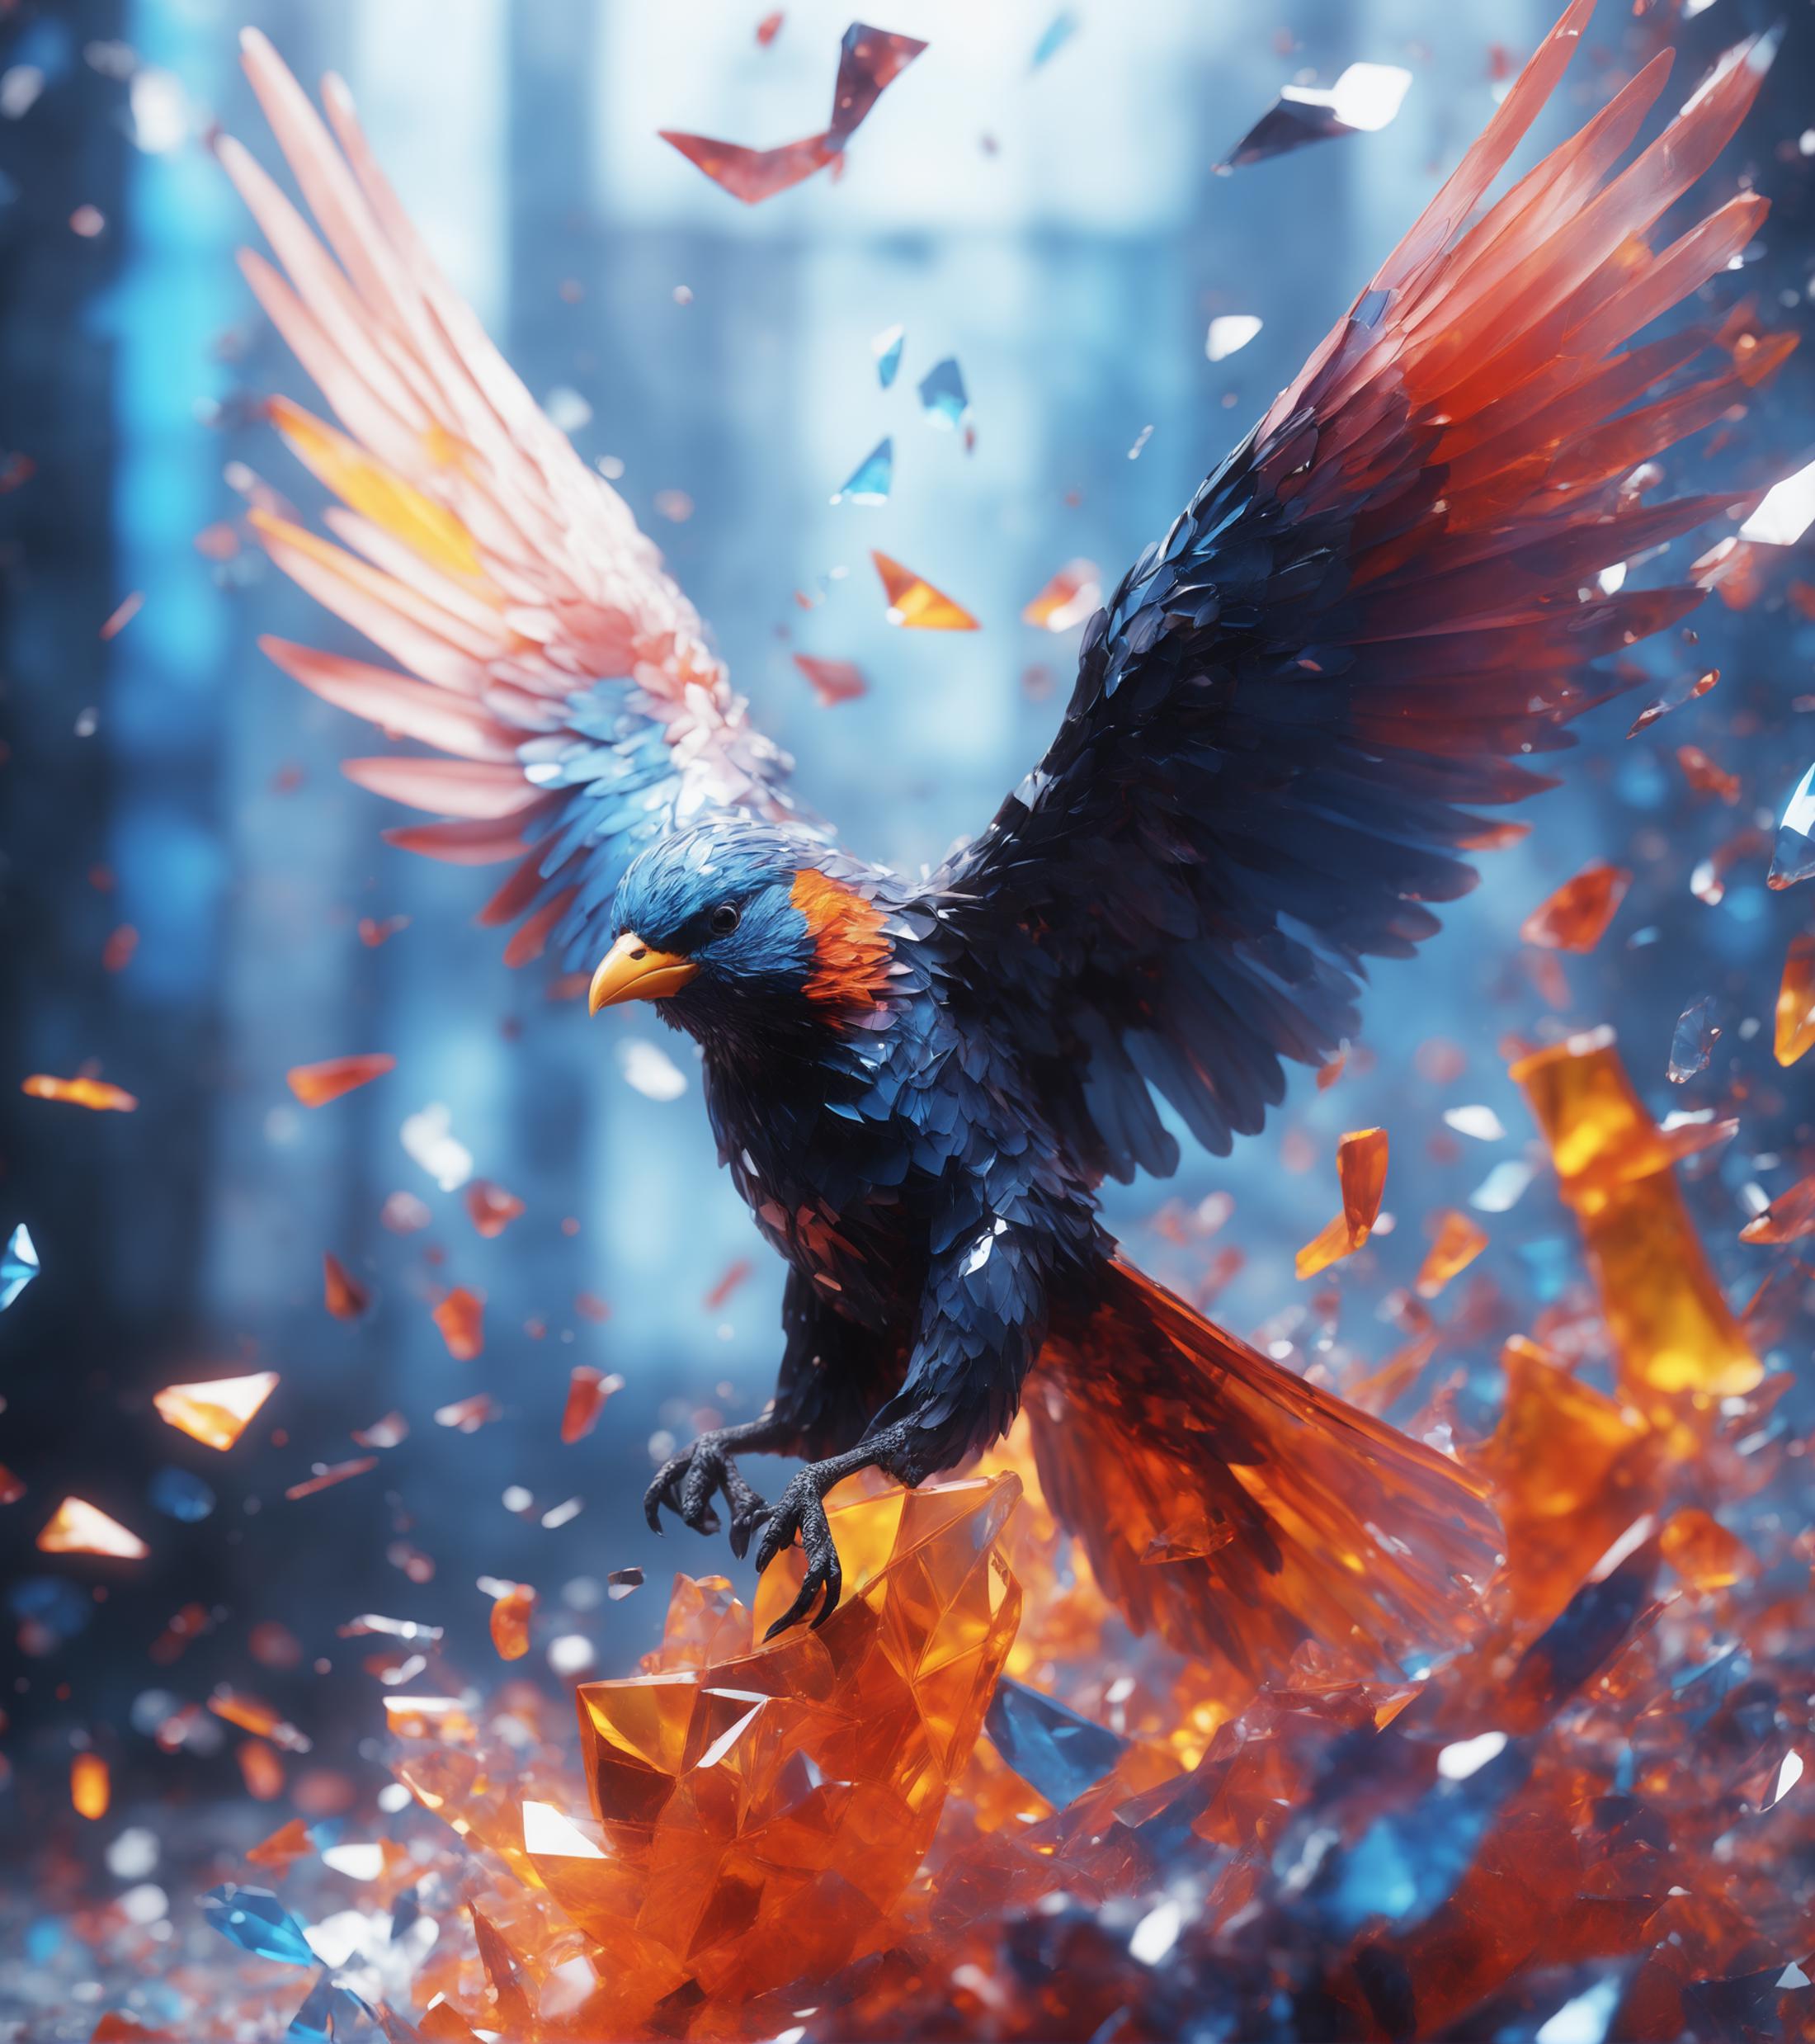 A black and blue bird with orange and yellow beak and feet, flying through a blue and white background with shards of glass.